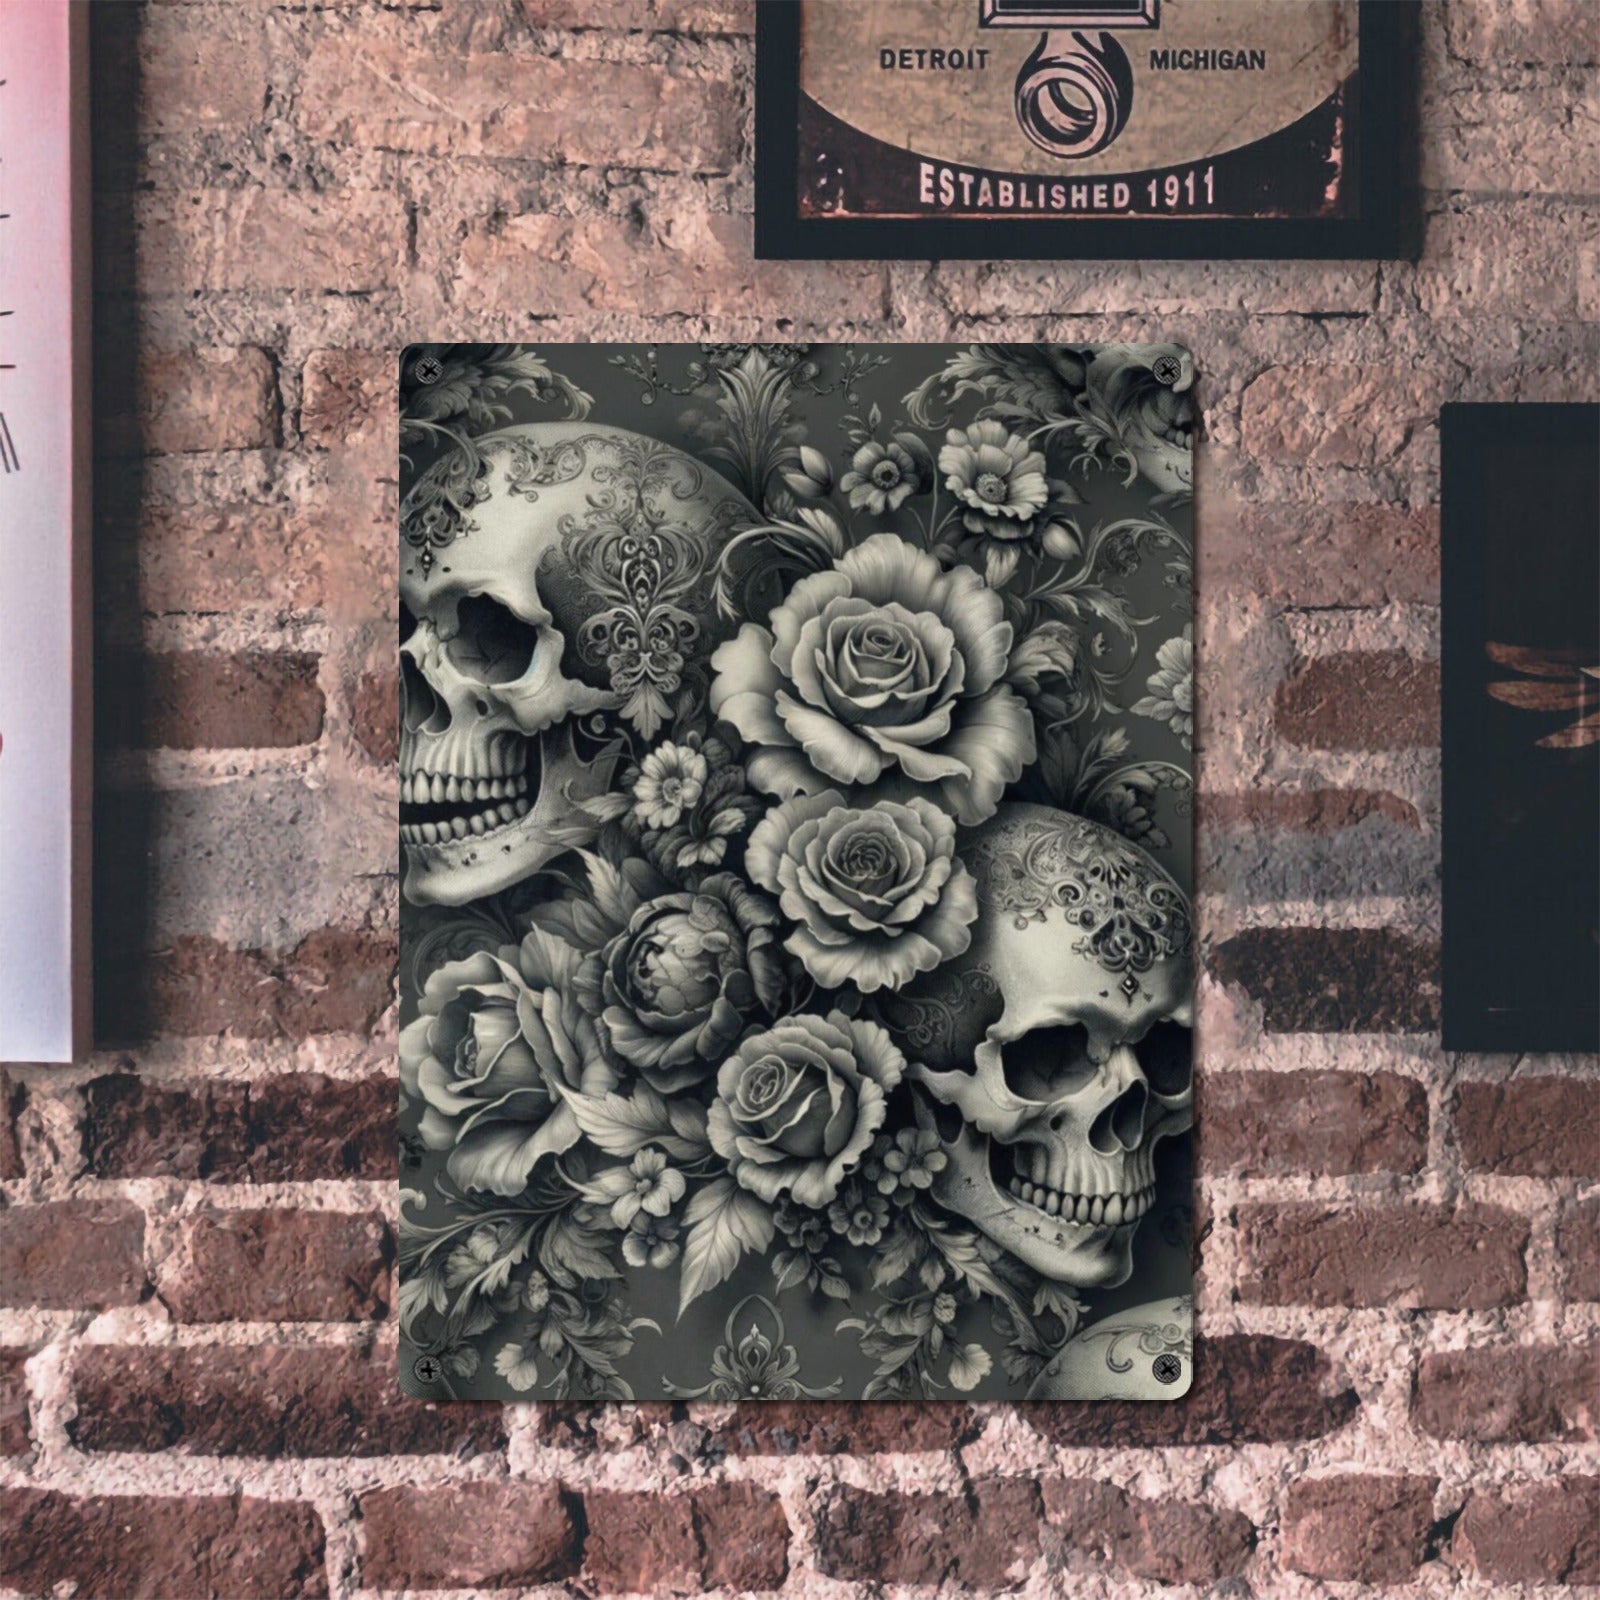 Gray Floral Skull Gothic Home Decor Wall Art Poster Rose Skull Sign Indoor / Outdoor Metal Tin Sign 12"x16"